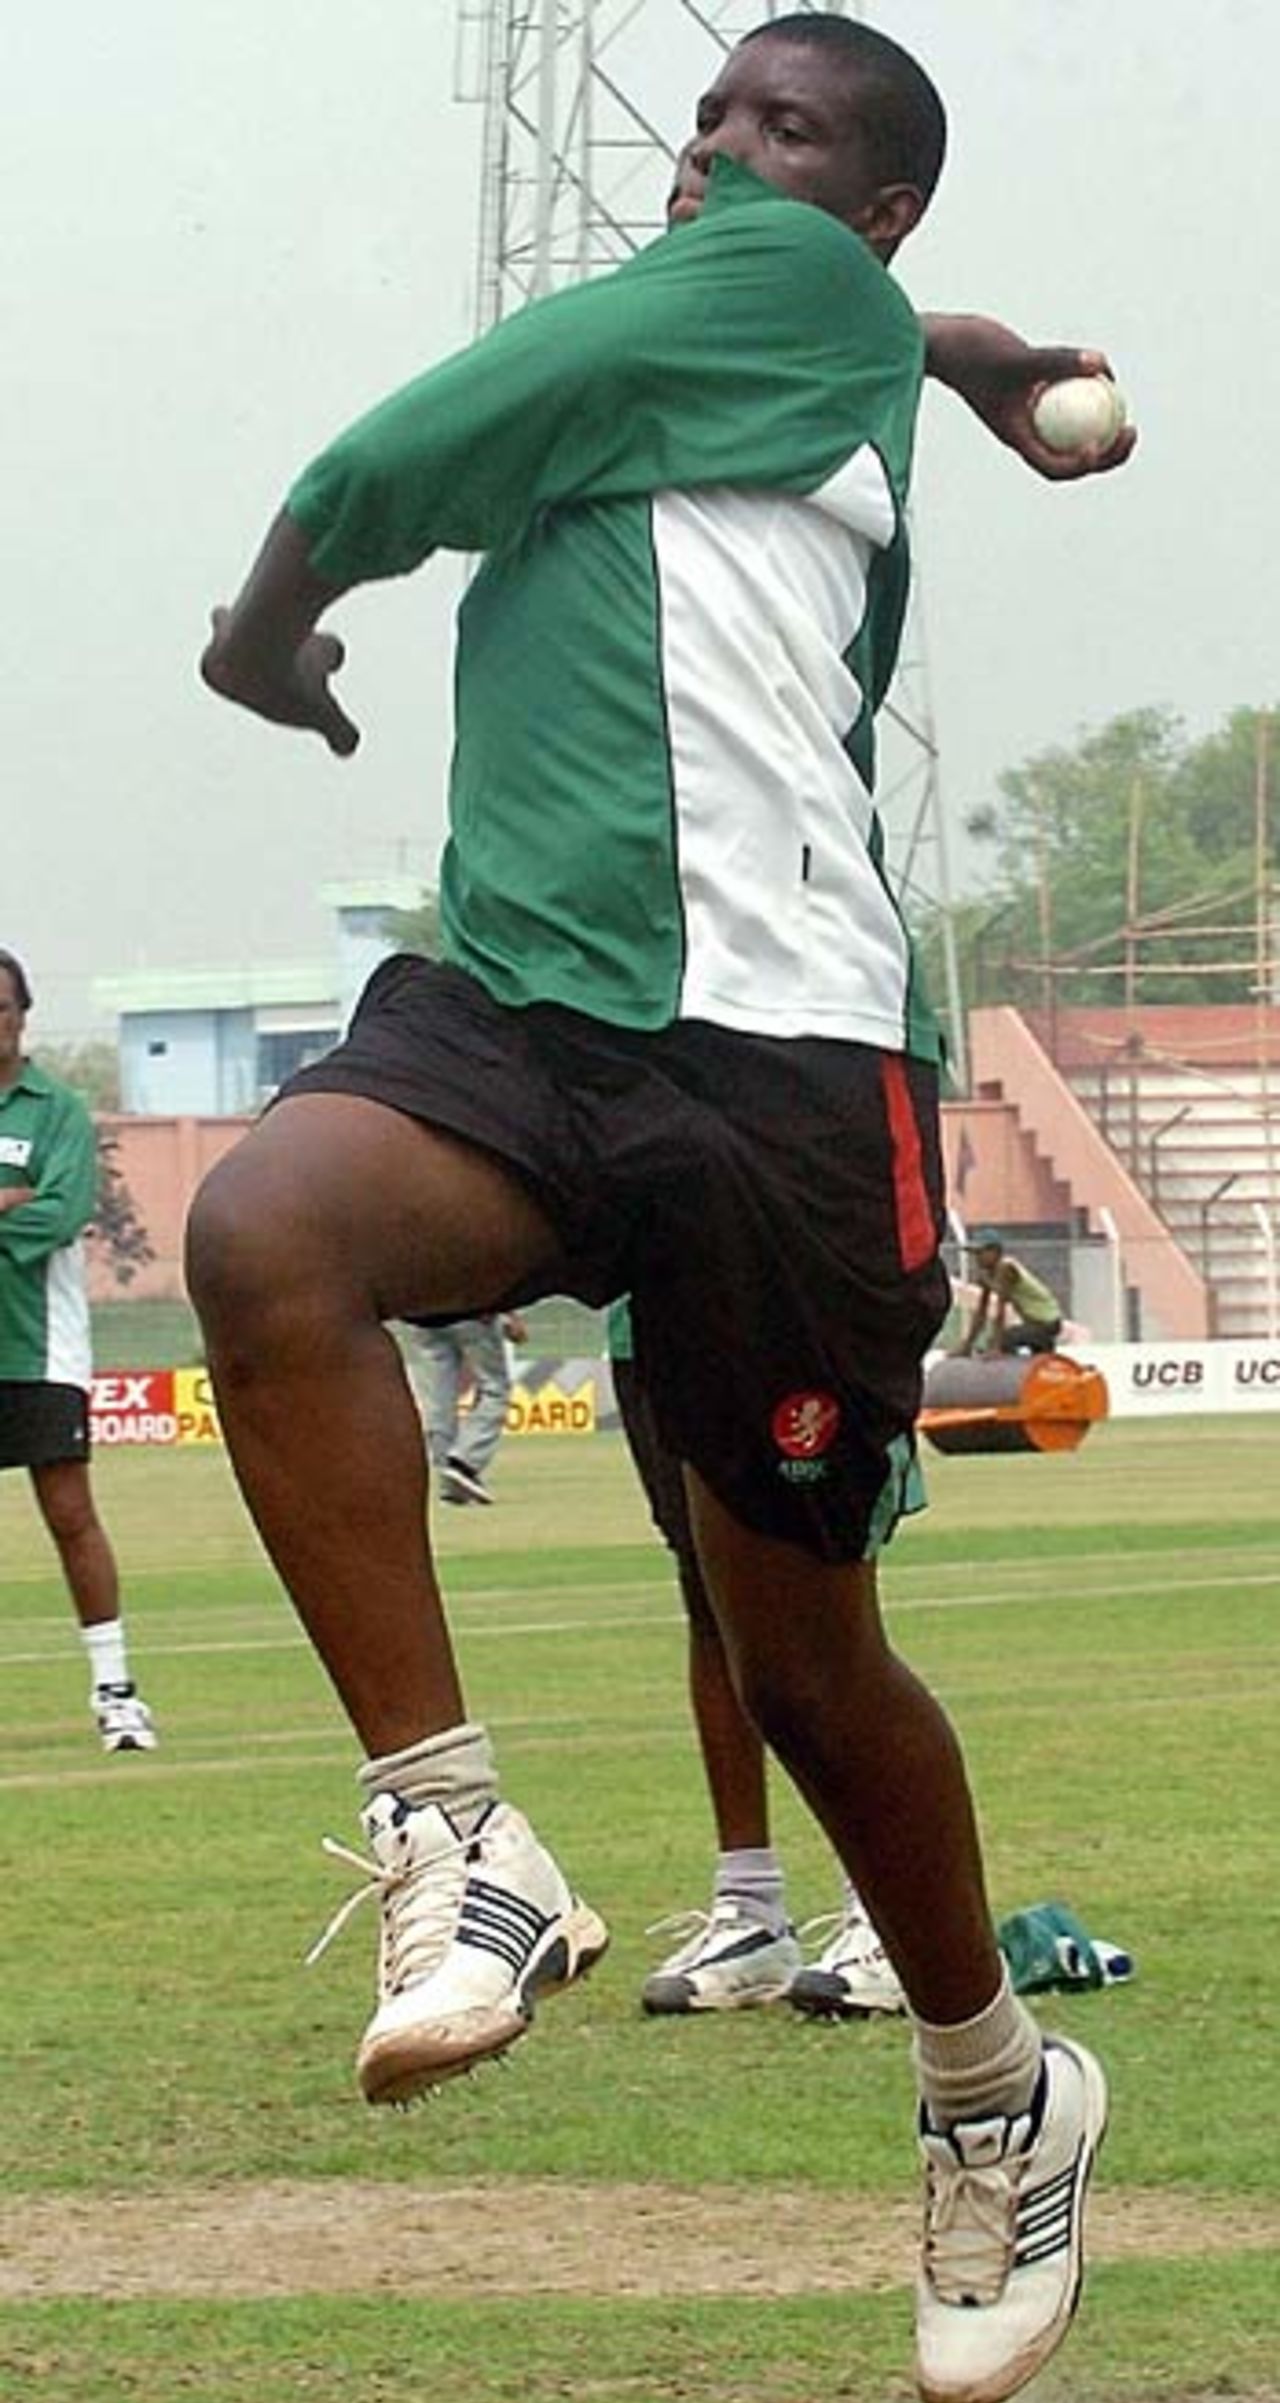 Peter Ongondo ready to fire, Bogra, March 16, 2006